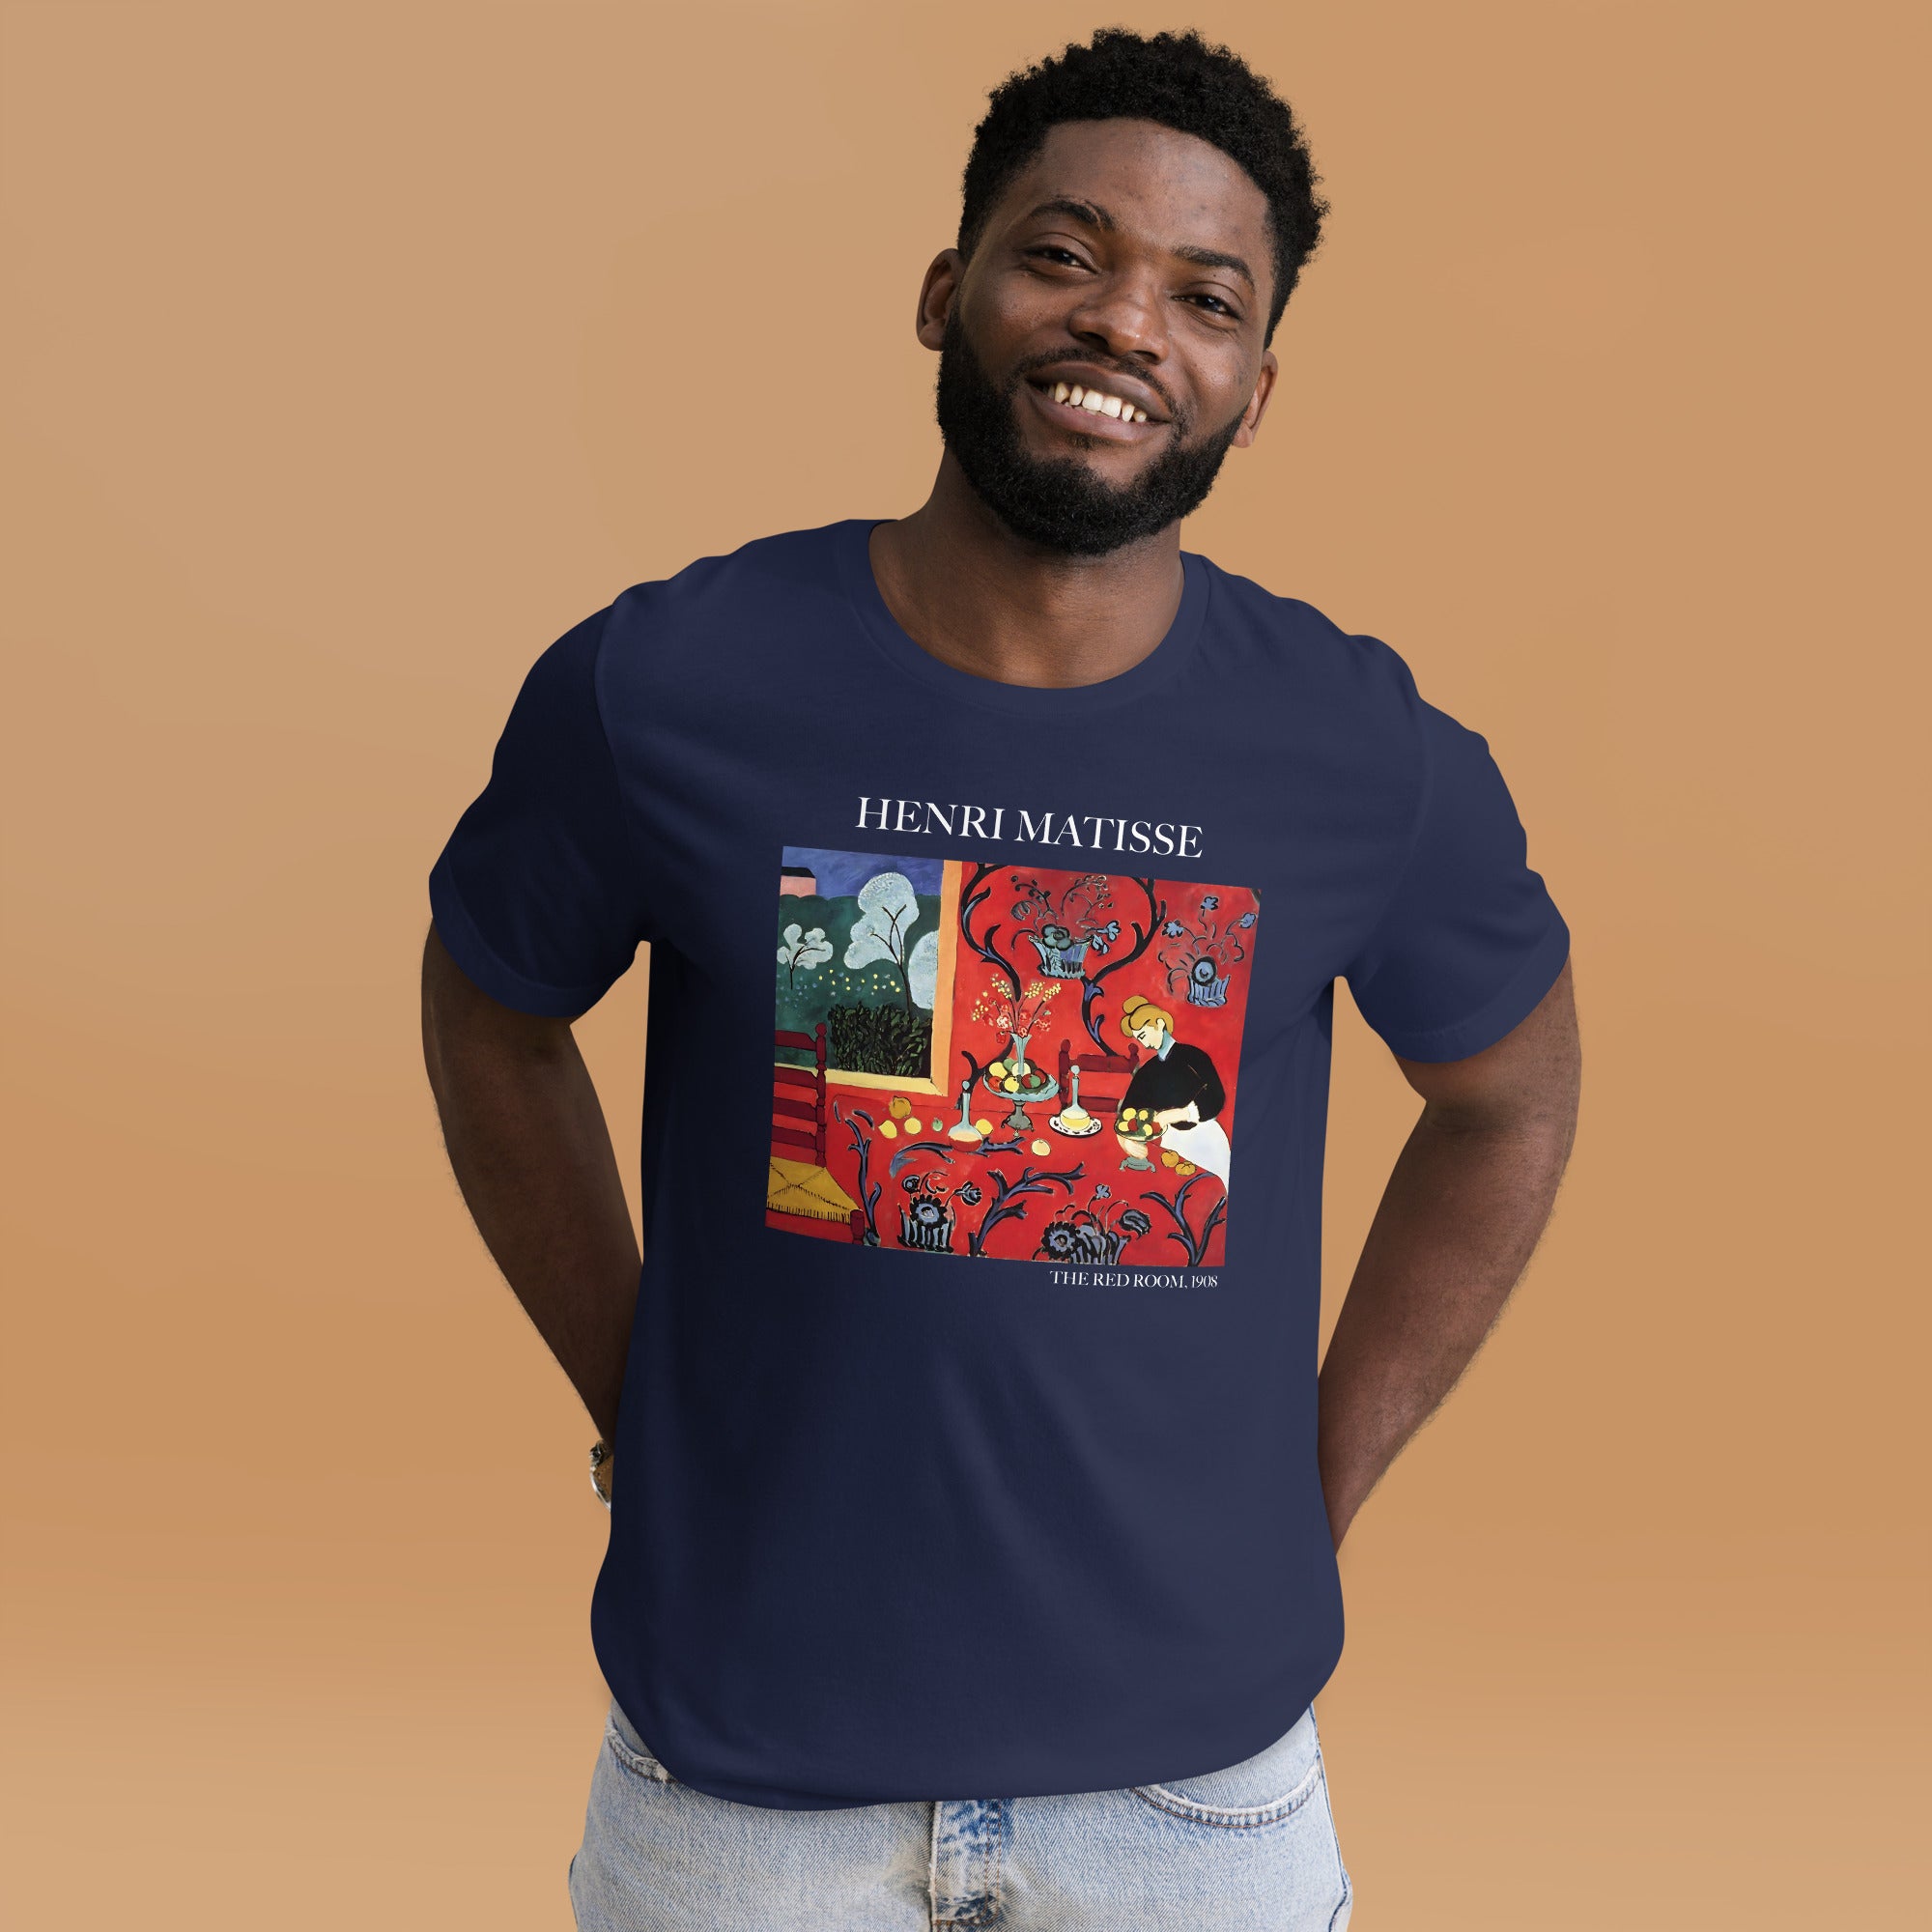 Henri Matisse 'The Red Room' Famous Painting T-Shirt | Unisex Classic Art Tee